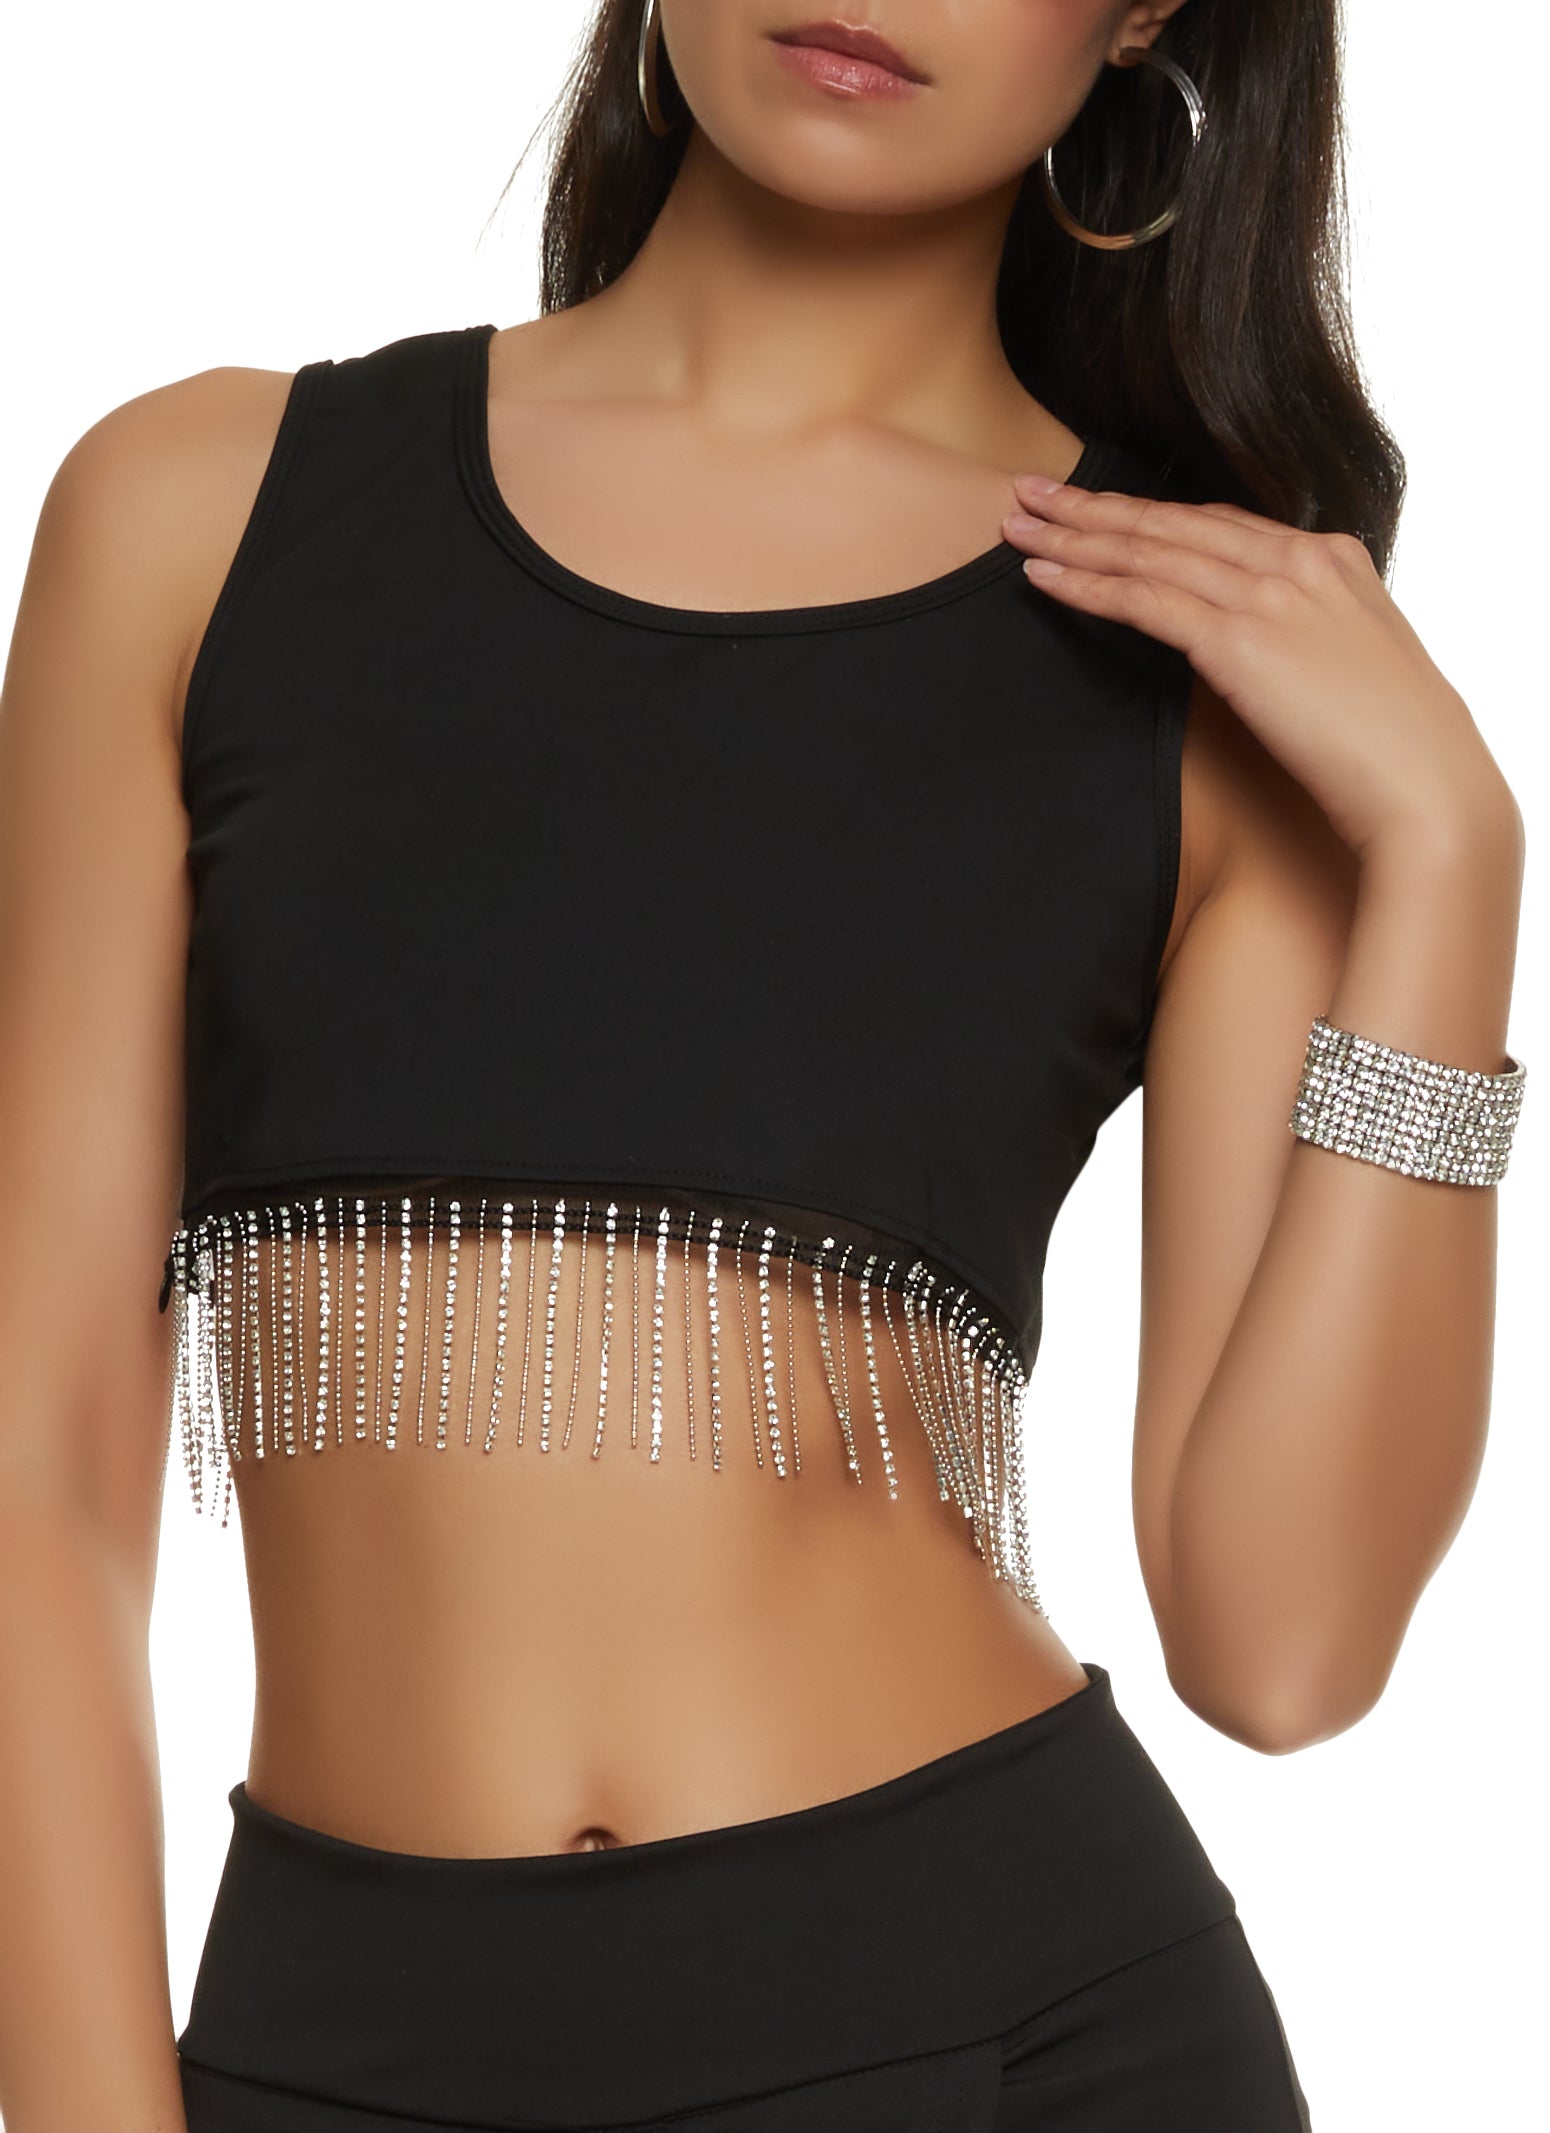 Black Strap Crop Top With Rhinestone Fringe – Free From Label